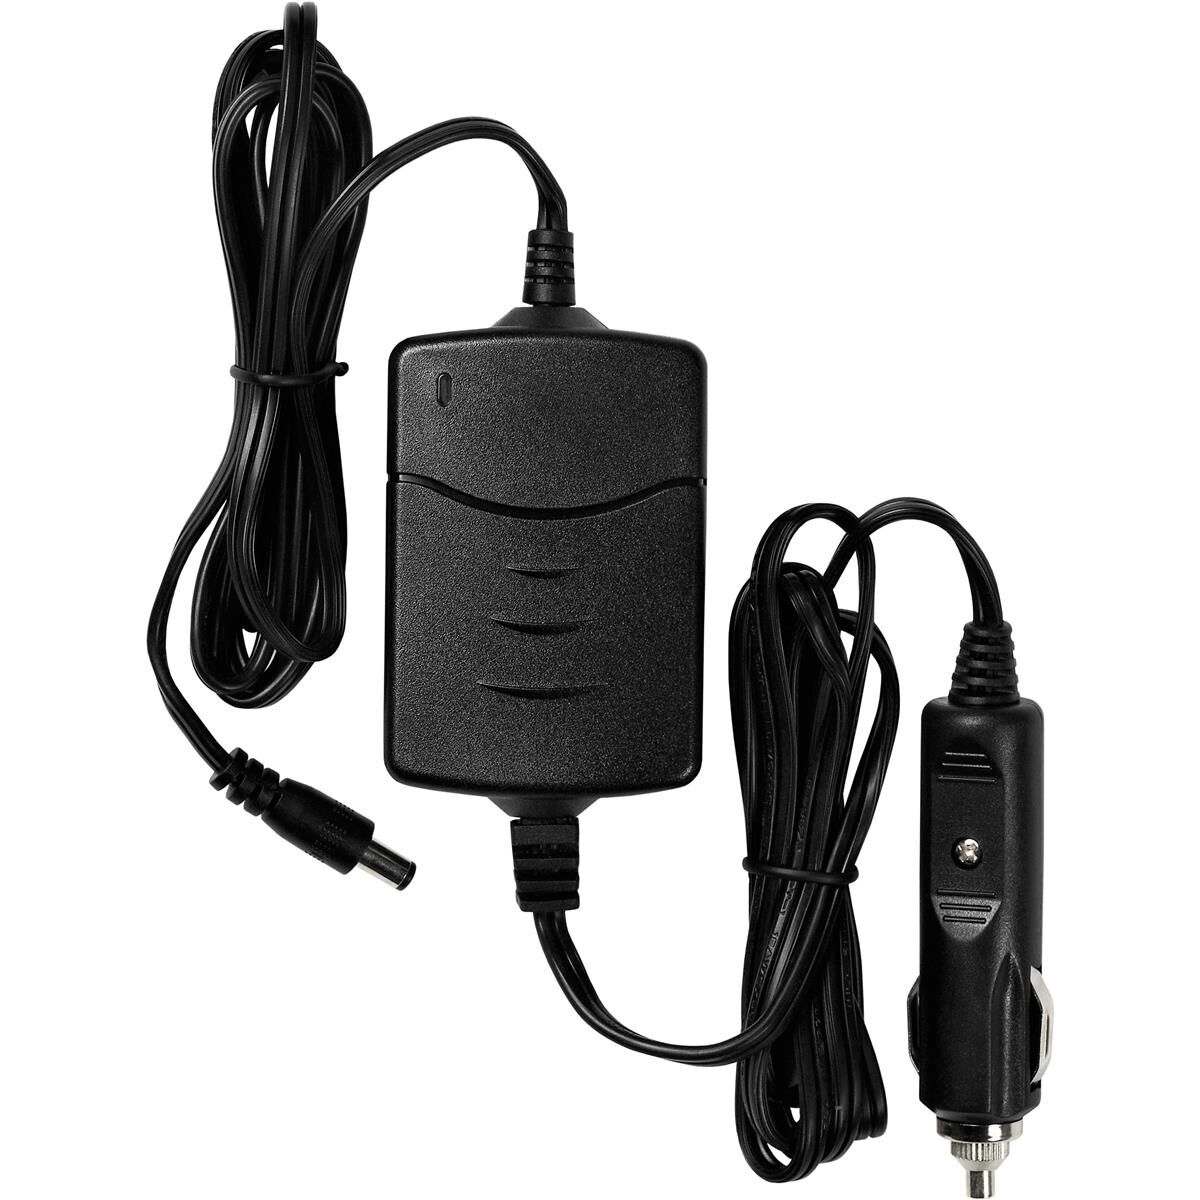 Profoto 1.8A Car Charger for B1 500 AirTTL Off-Camera Flash